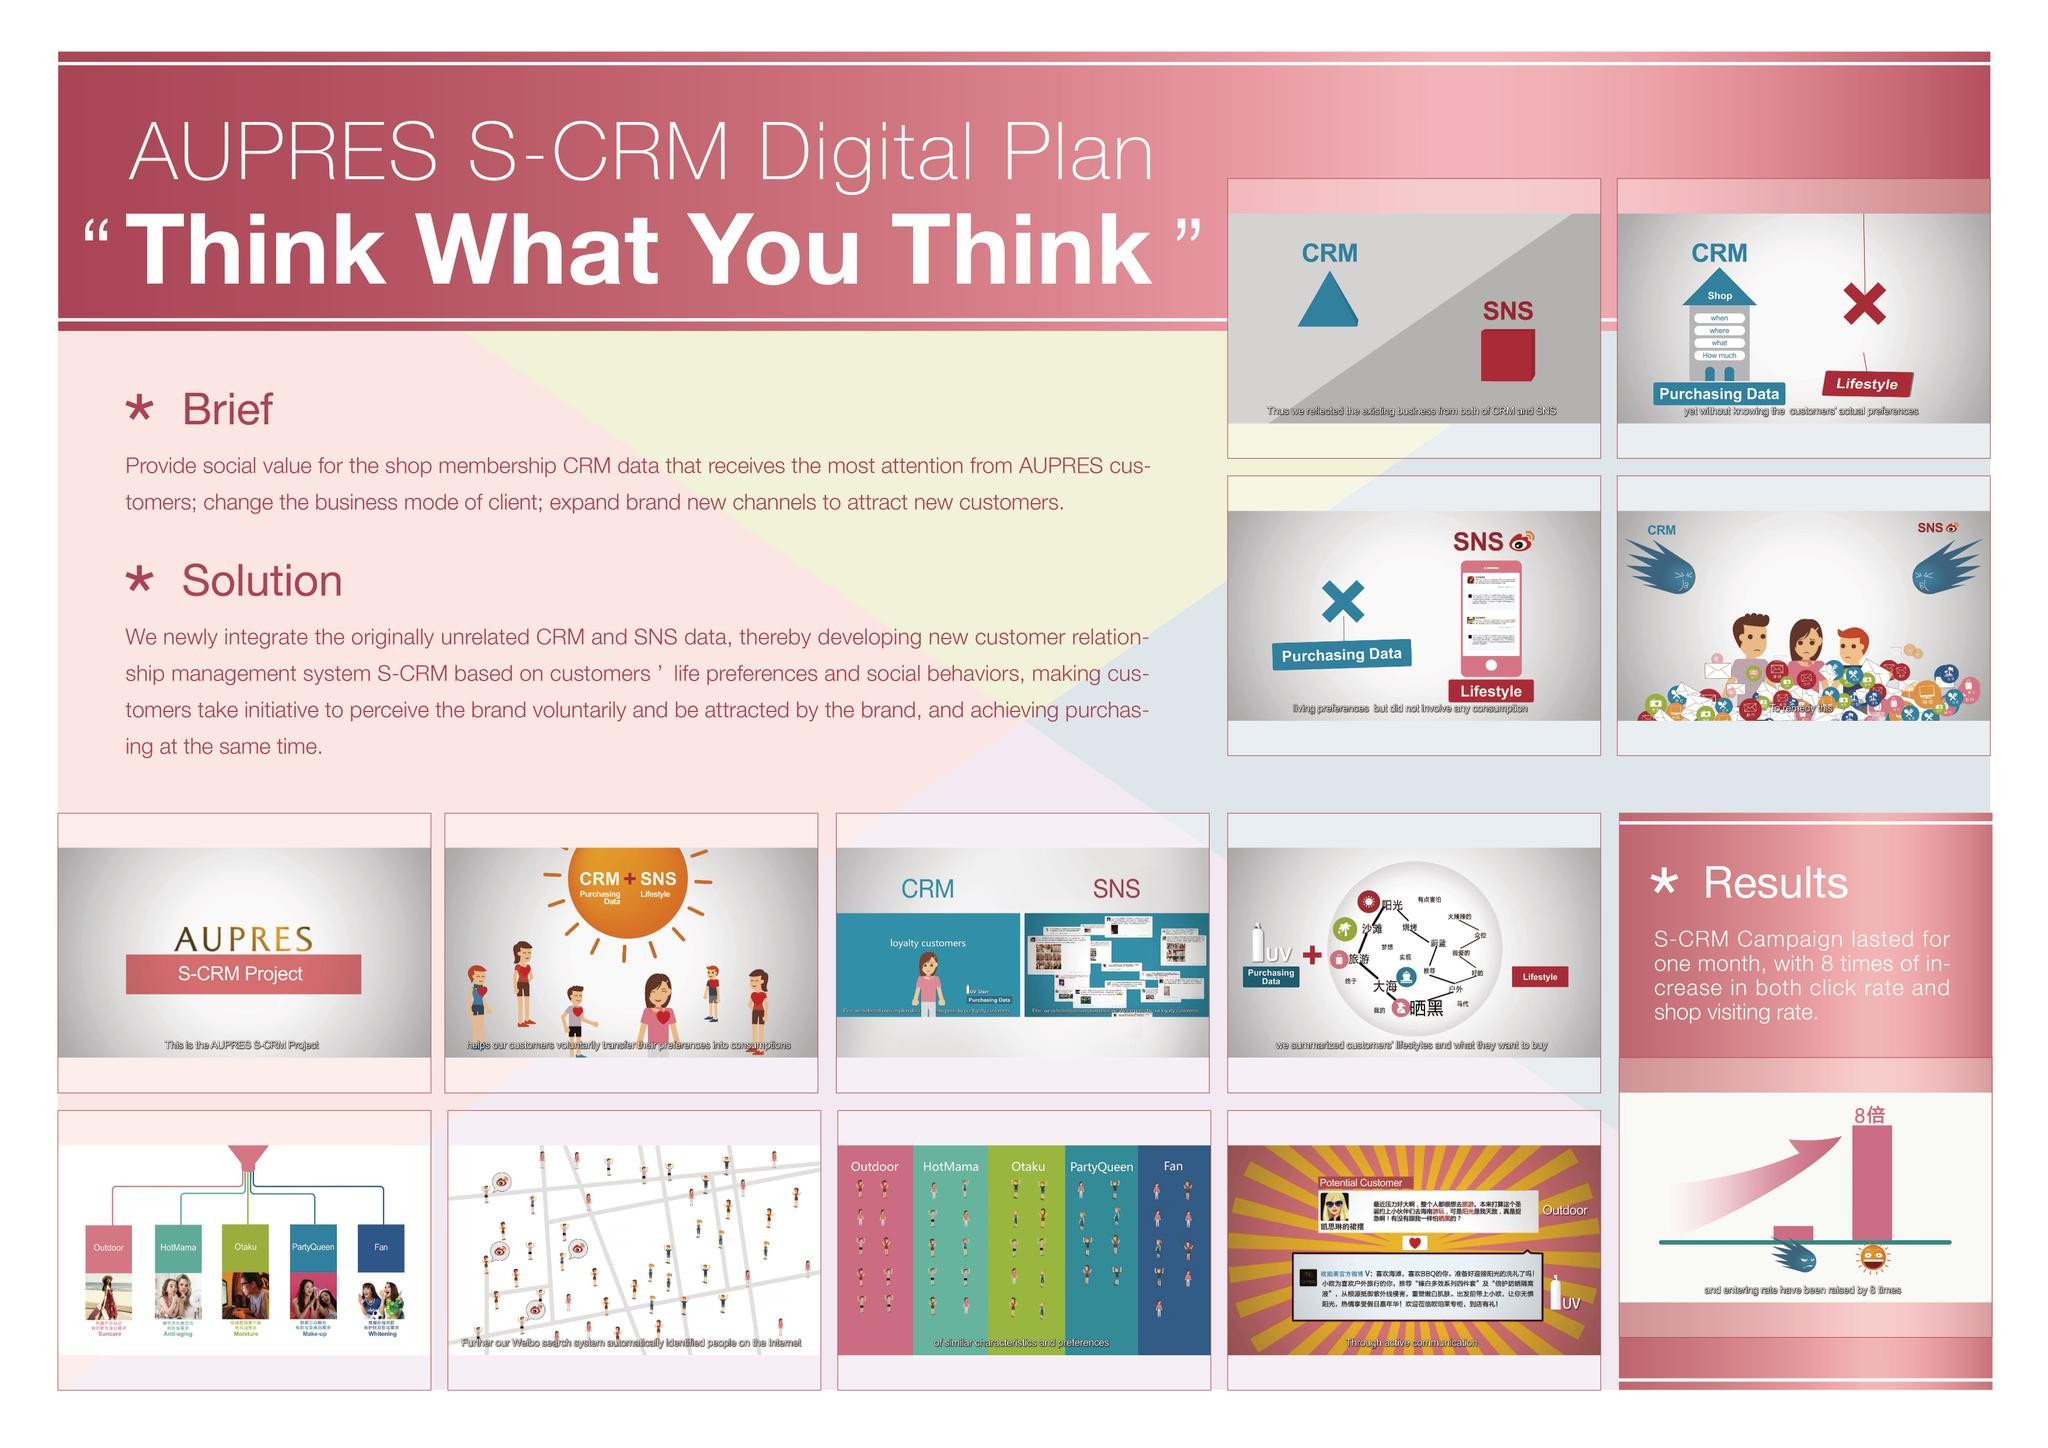 AUPRES  S-CRM DIGITAL PLAN “THINK WHAT YOU THINK”